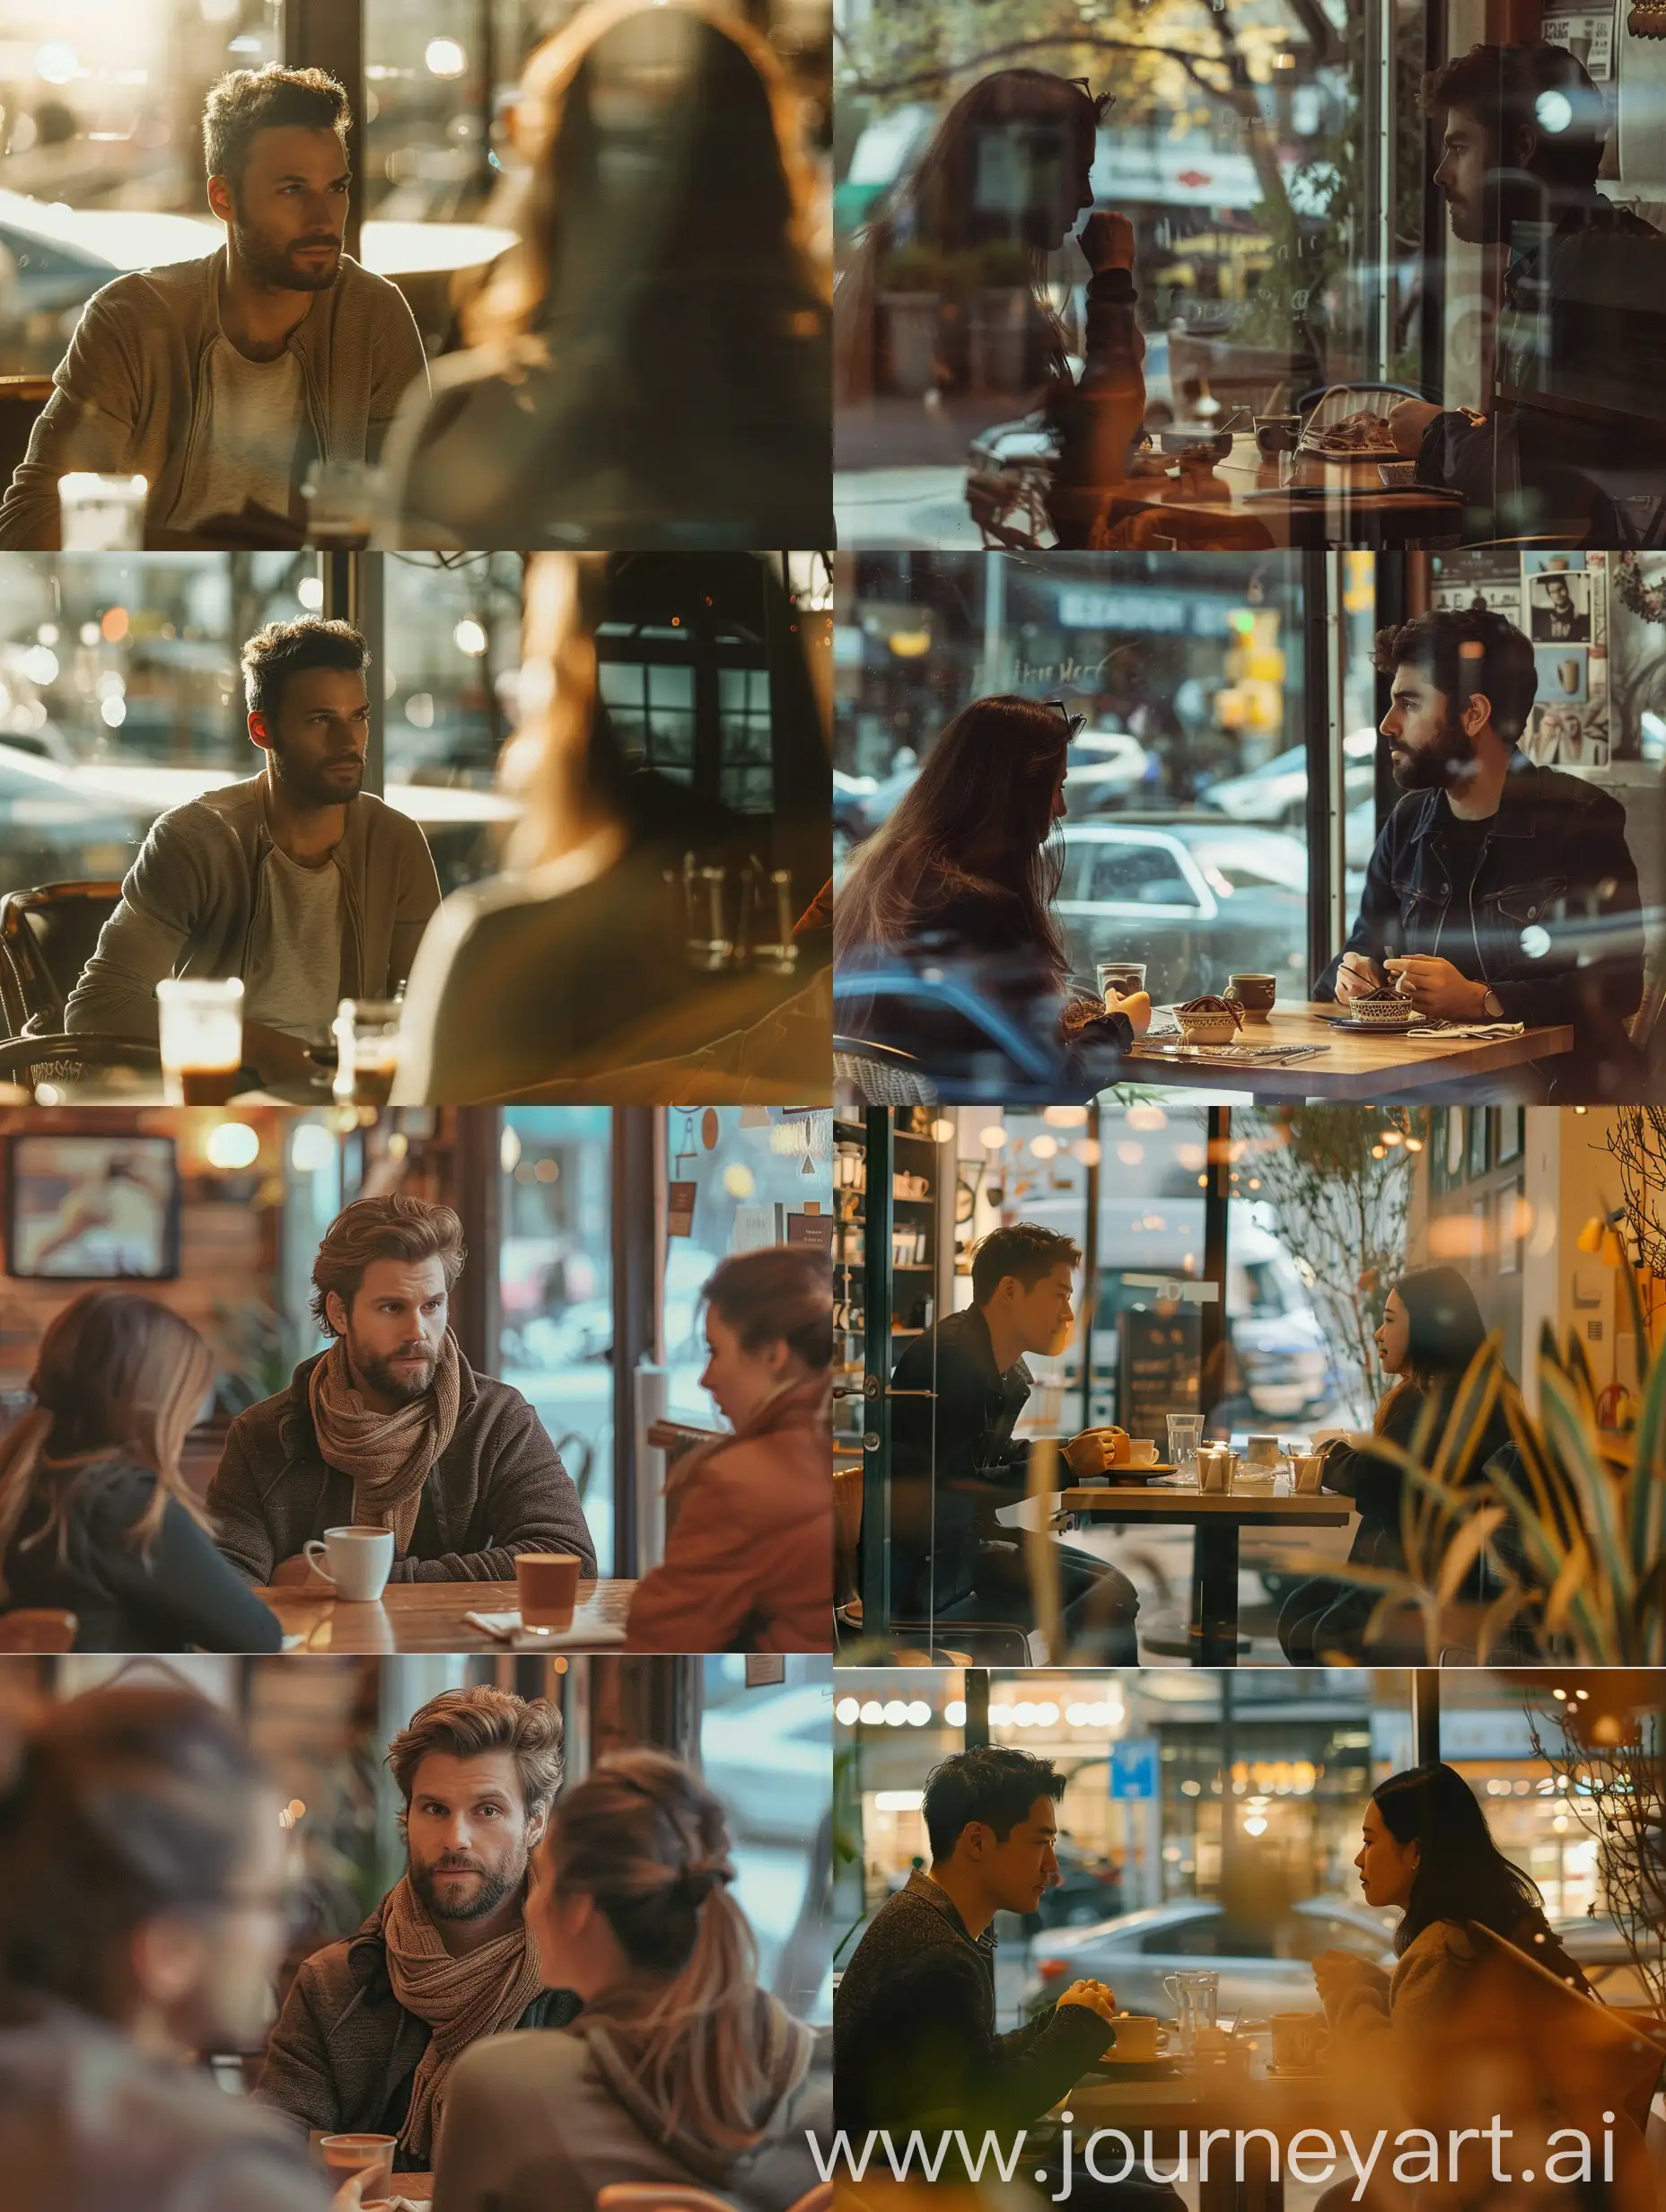 collage of 3 images from different angles, a cinematic shot, a man with his girlfriend in a offee shop, are seated at a table, engaged in a conversation.